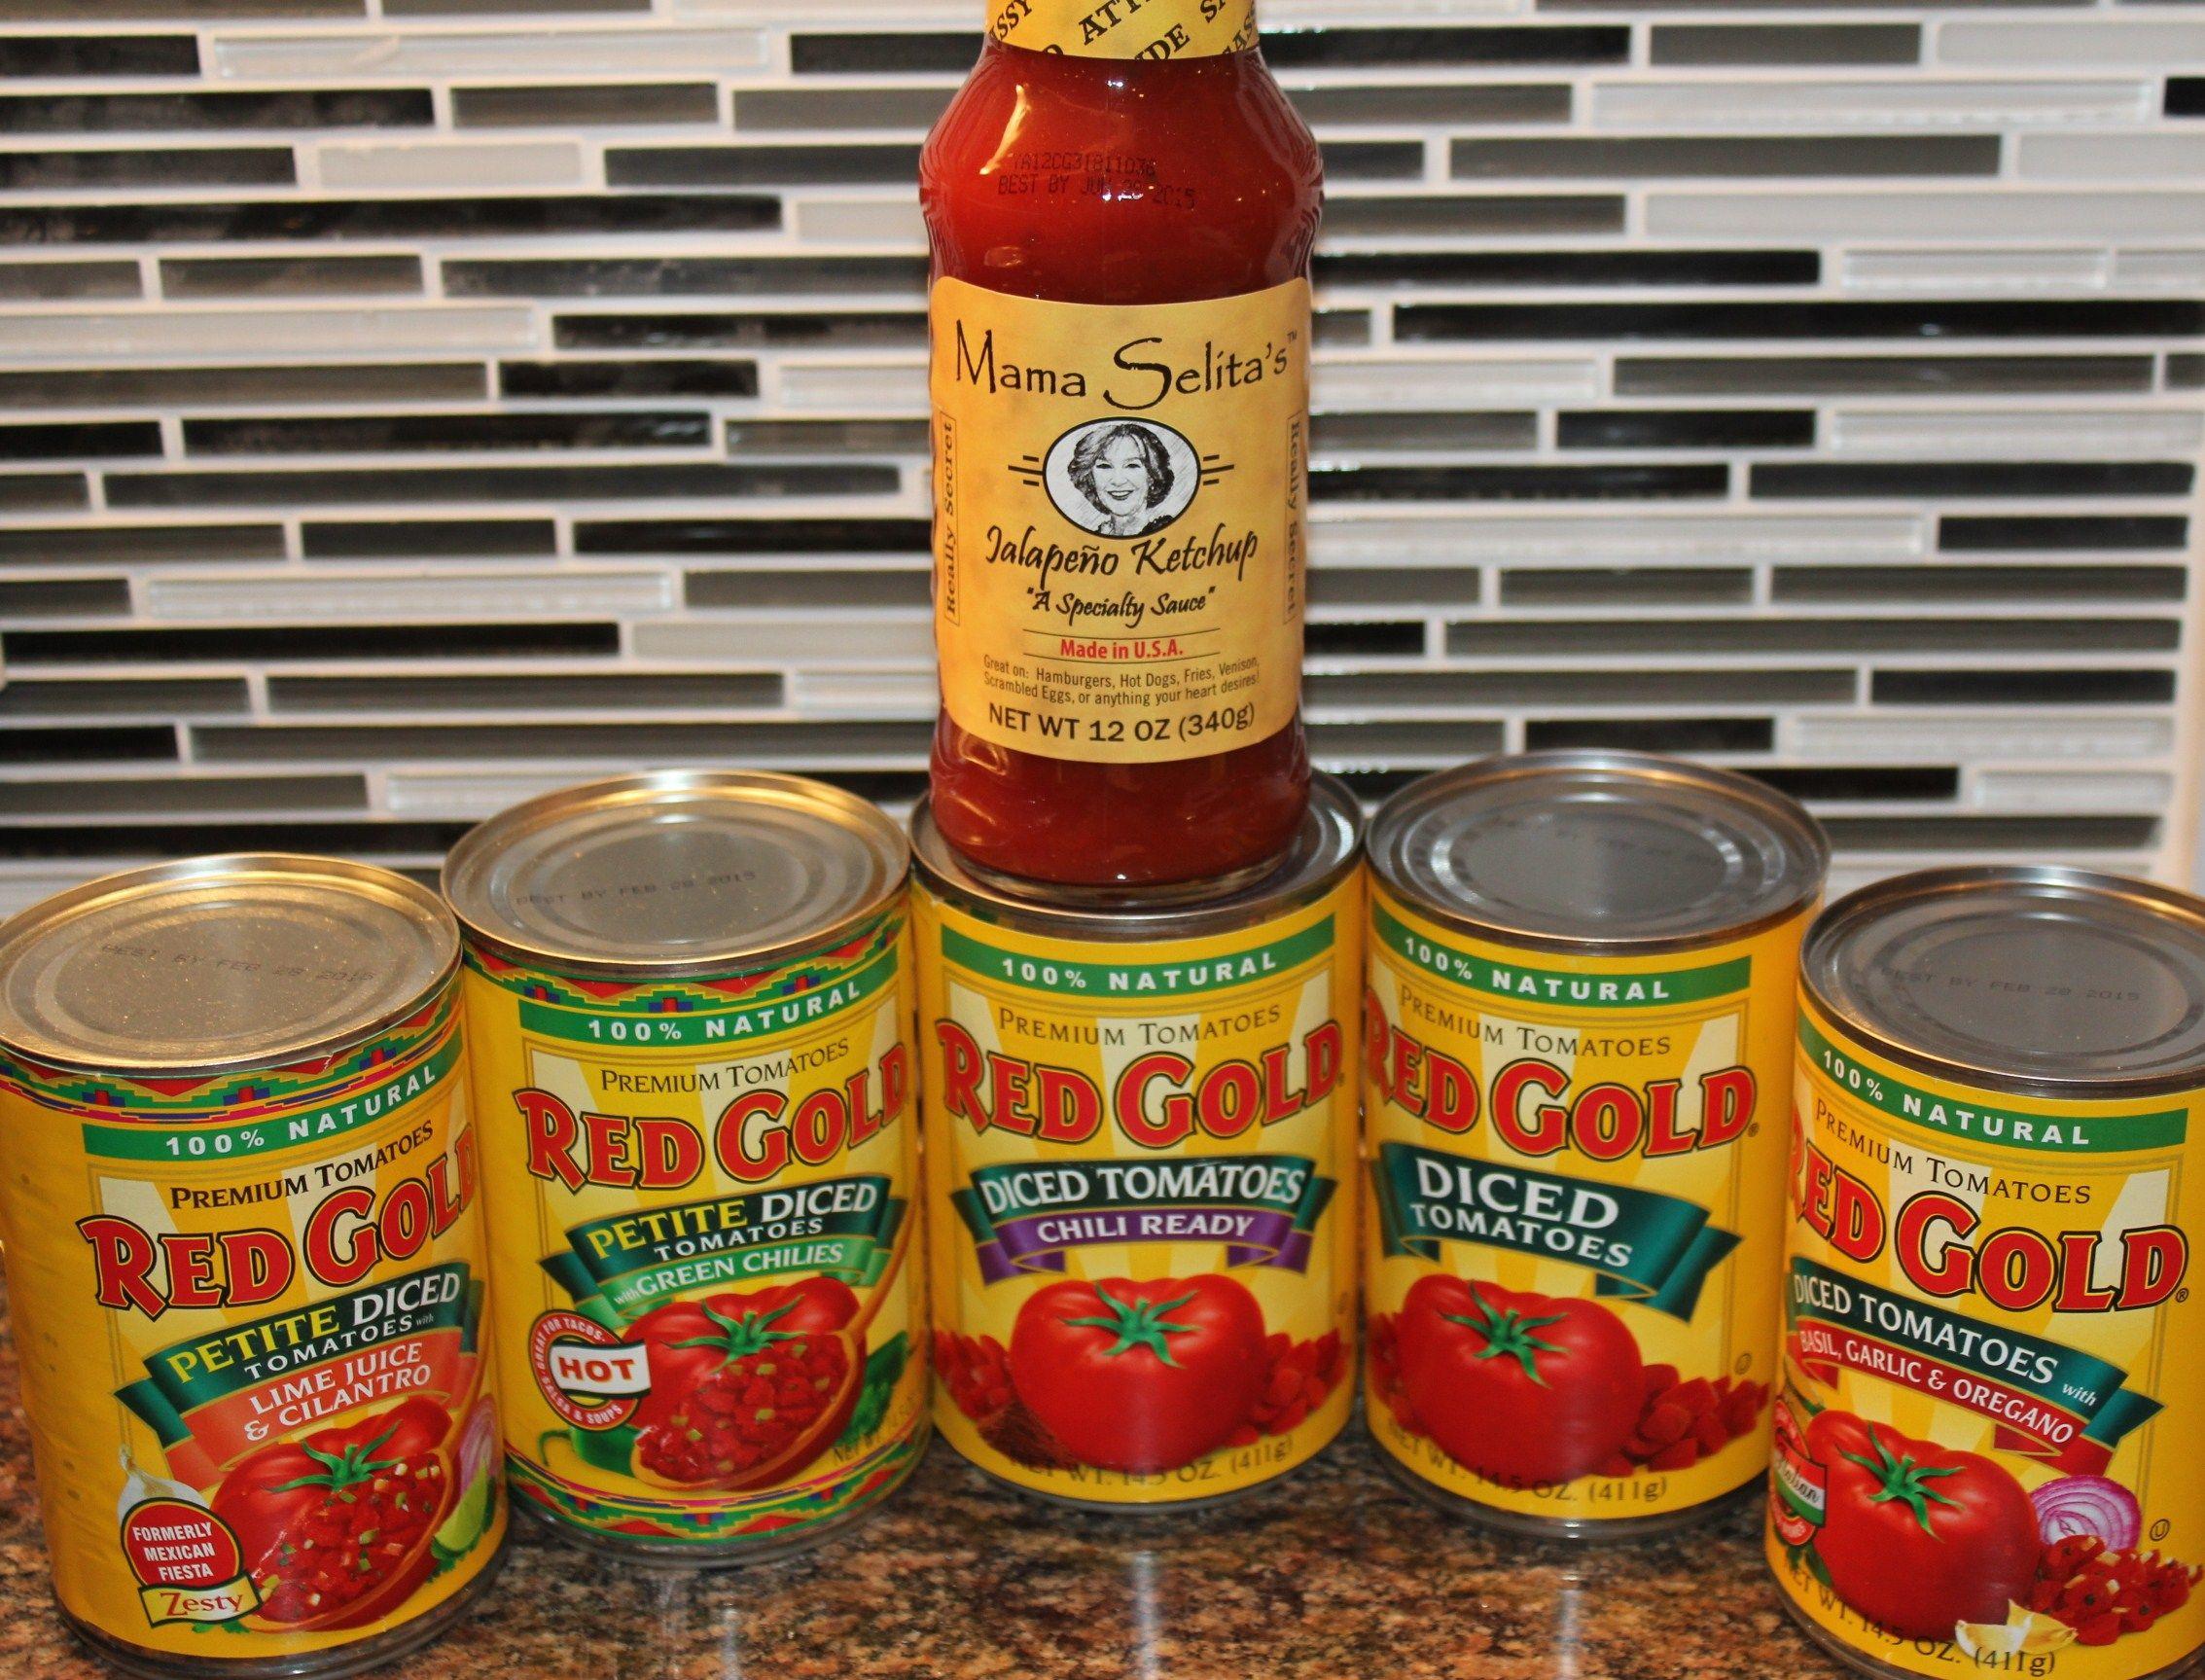 Red Gold Tomatoes Logo - Product Review: Red Gold Tomatoes! | Kel's Cafe of All Things Food